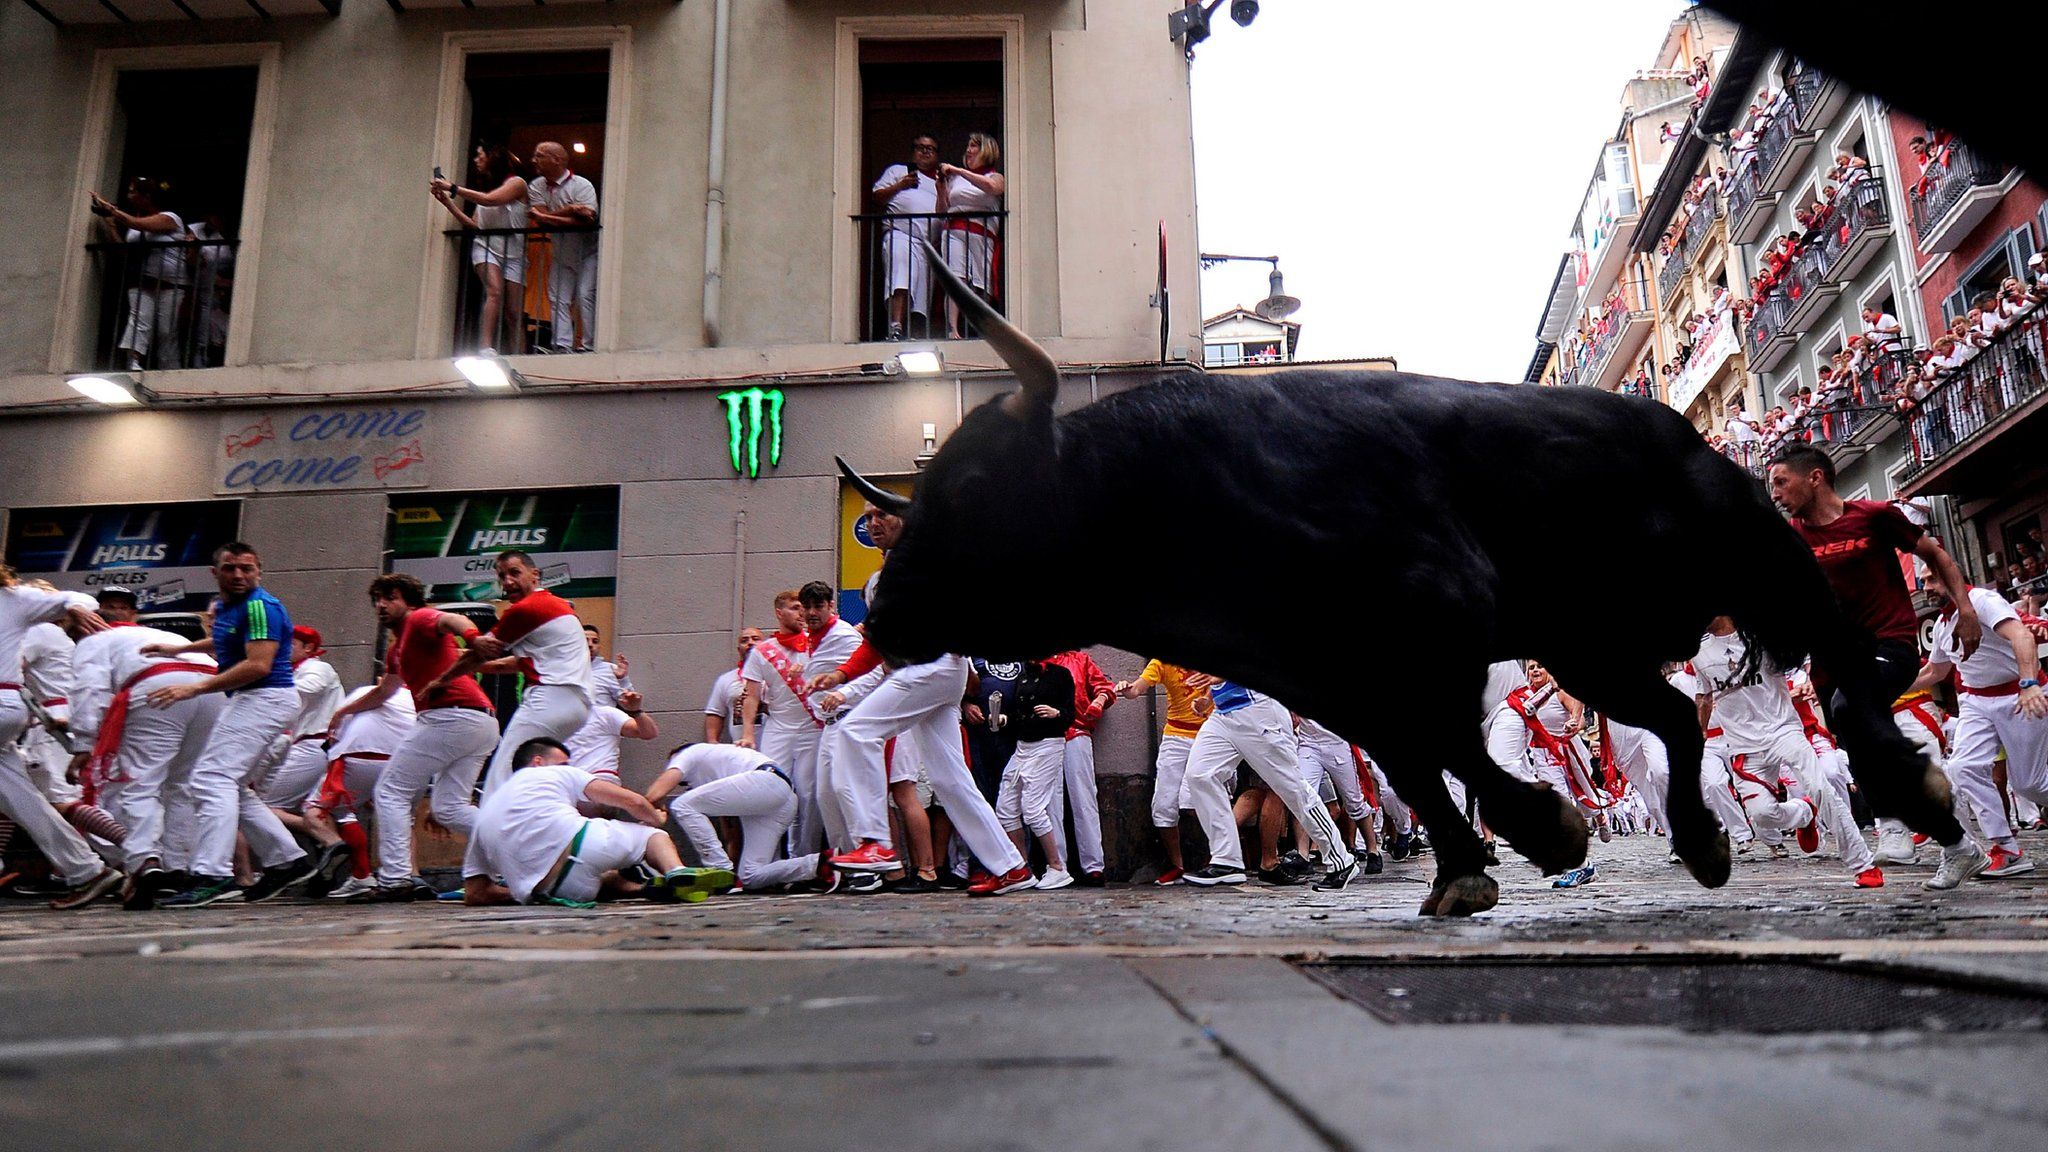 A bull and runners at Pamplona 2018